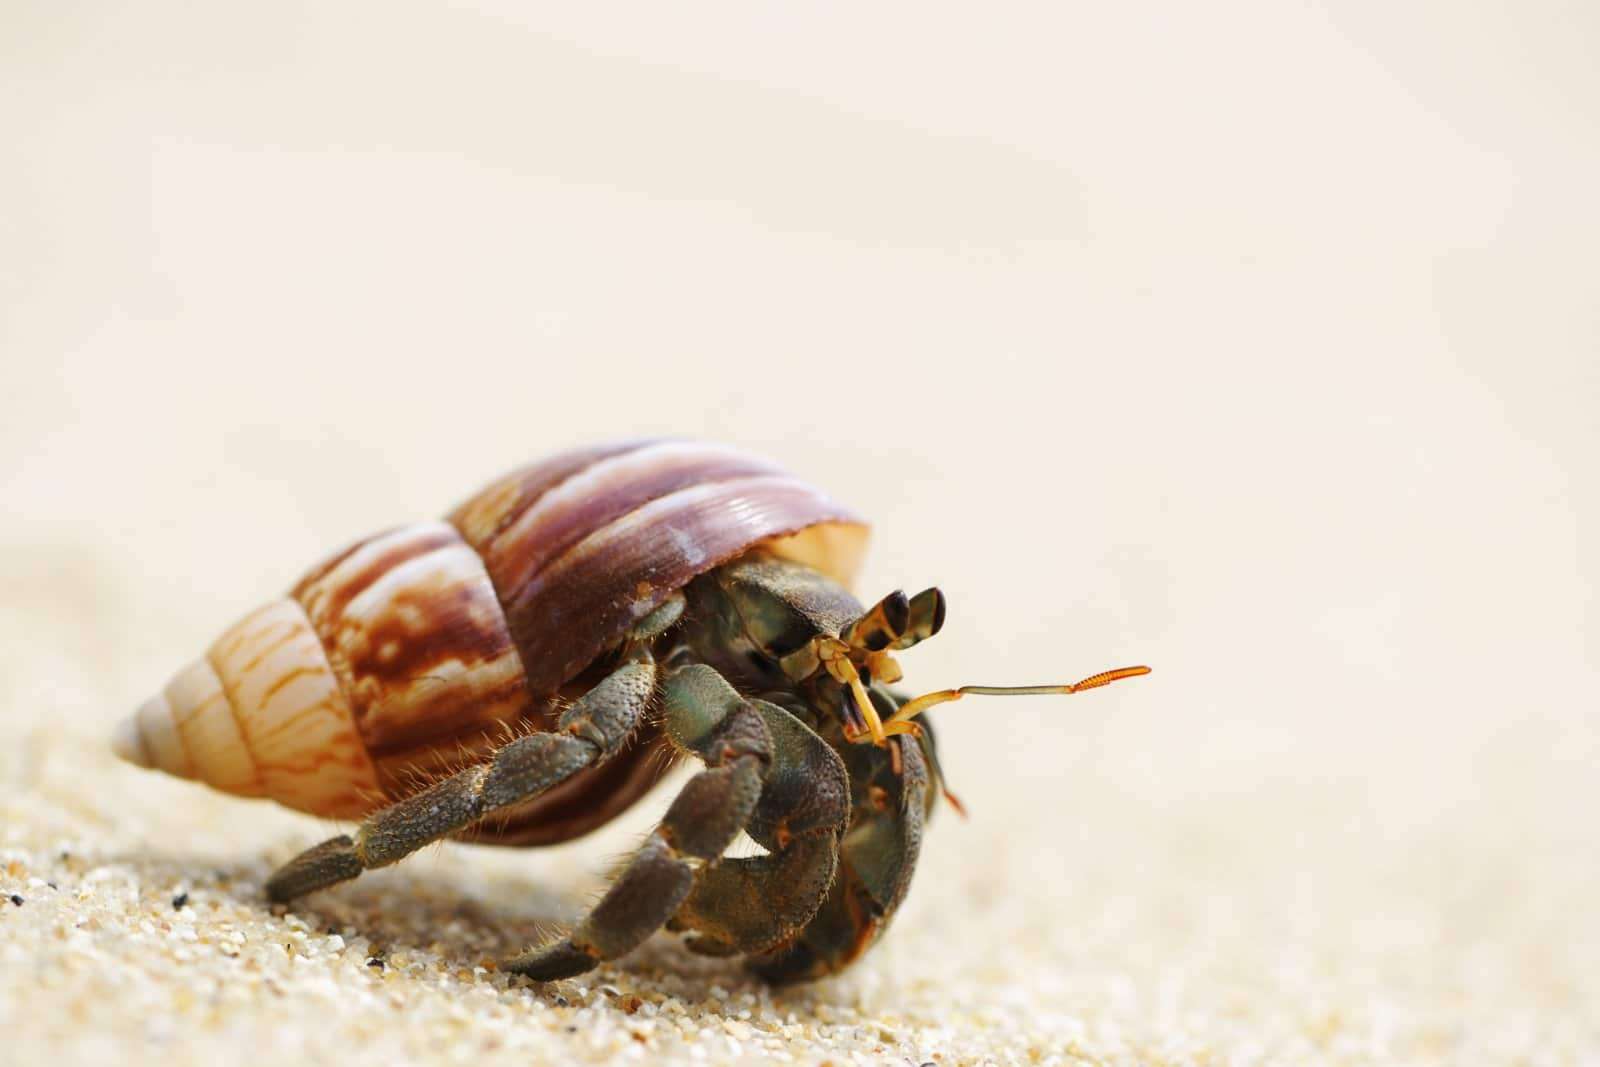 How To Make Salt Water For Hermit Crabs
